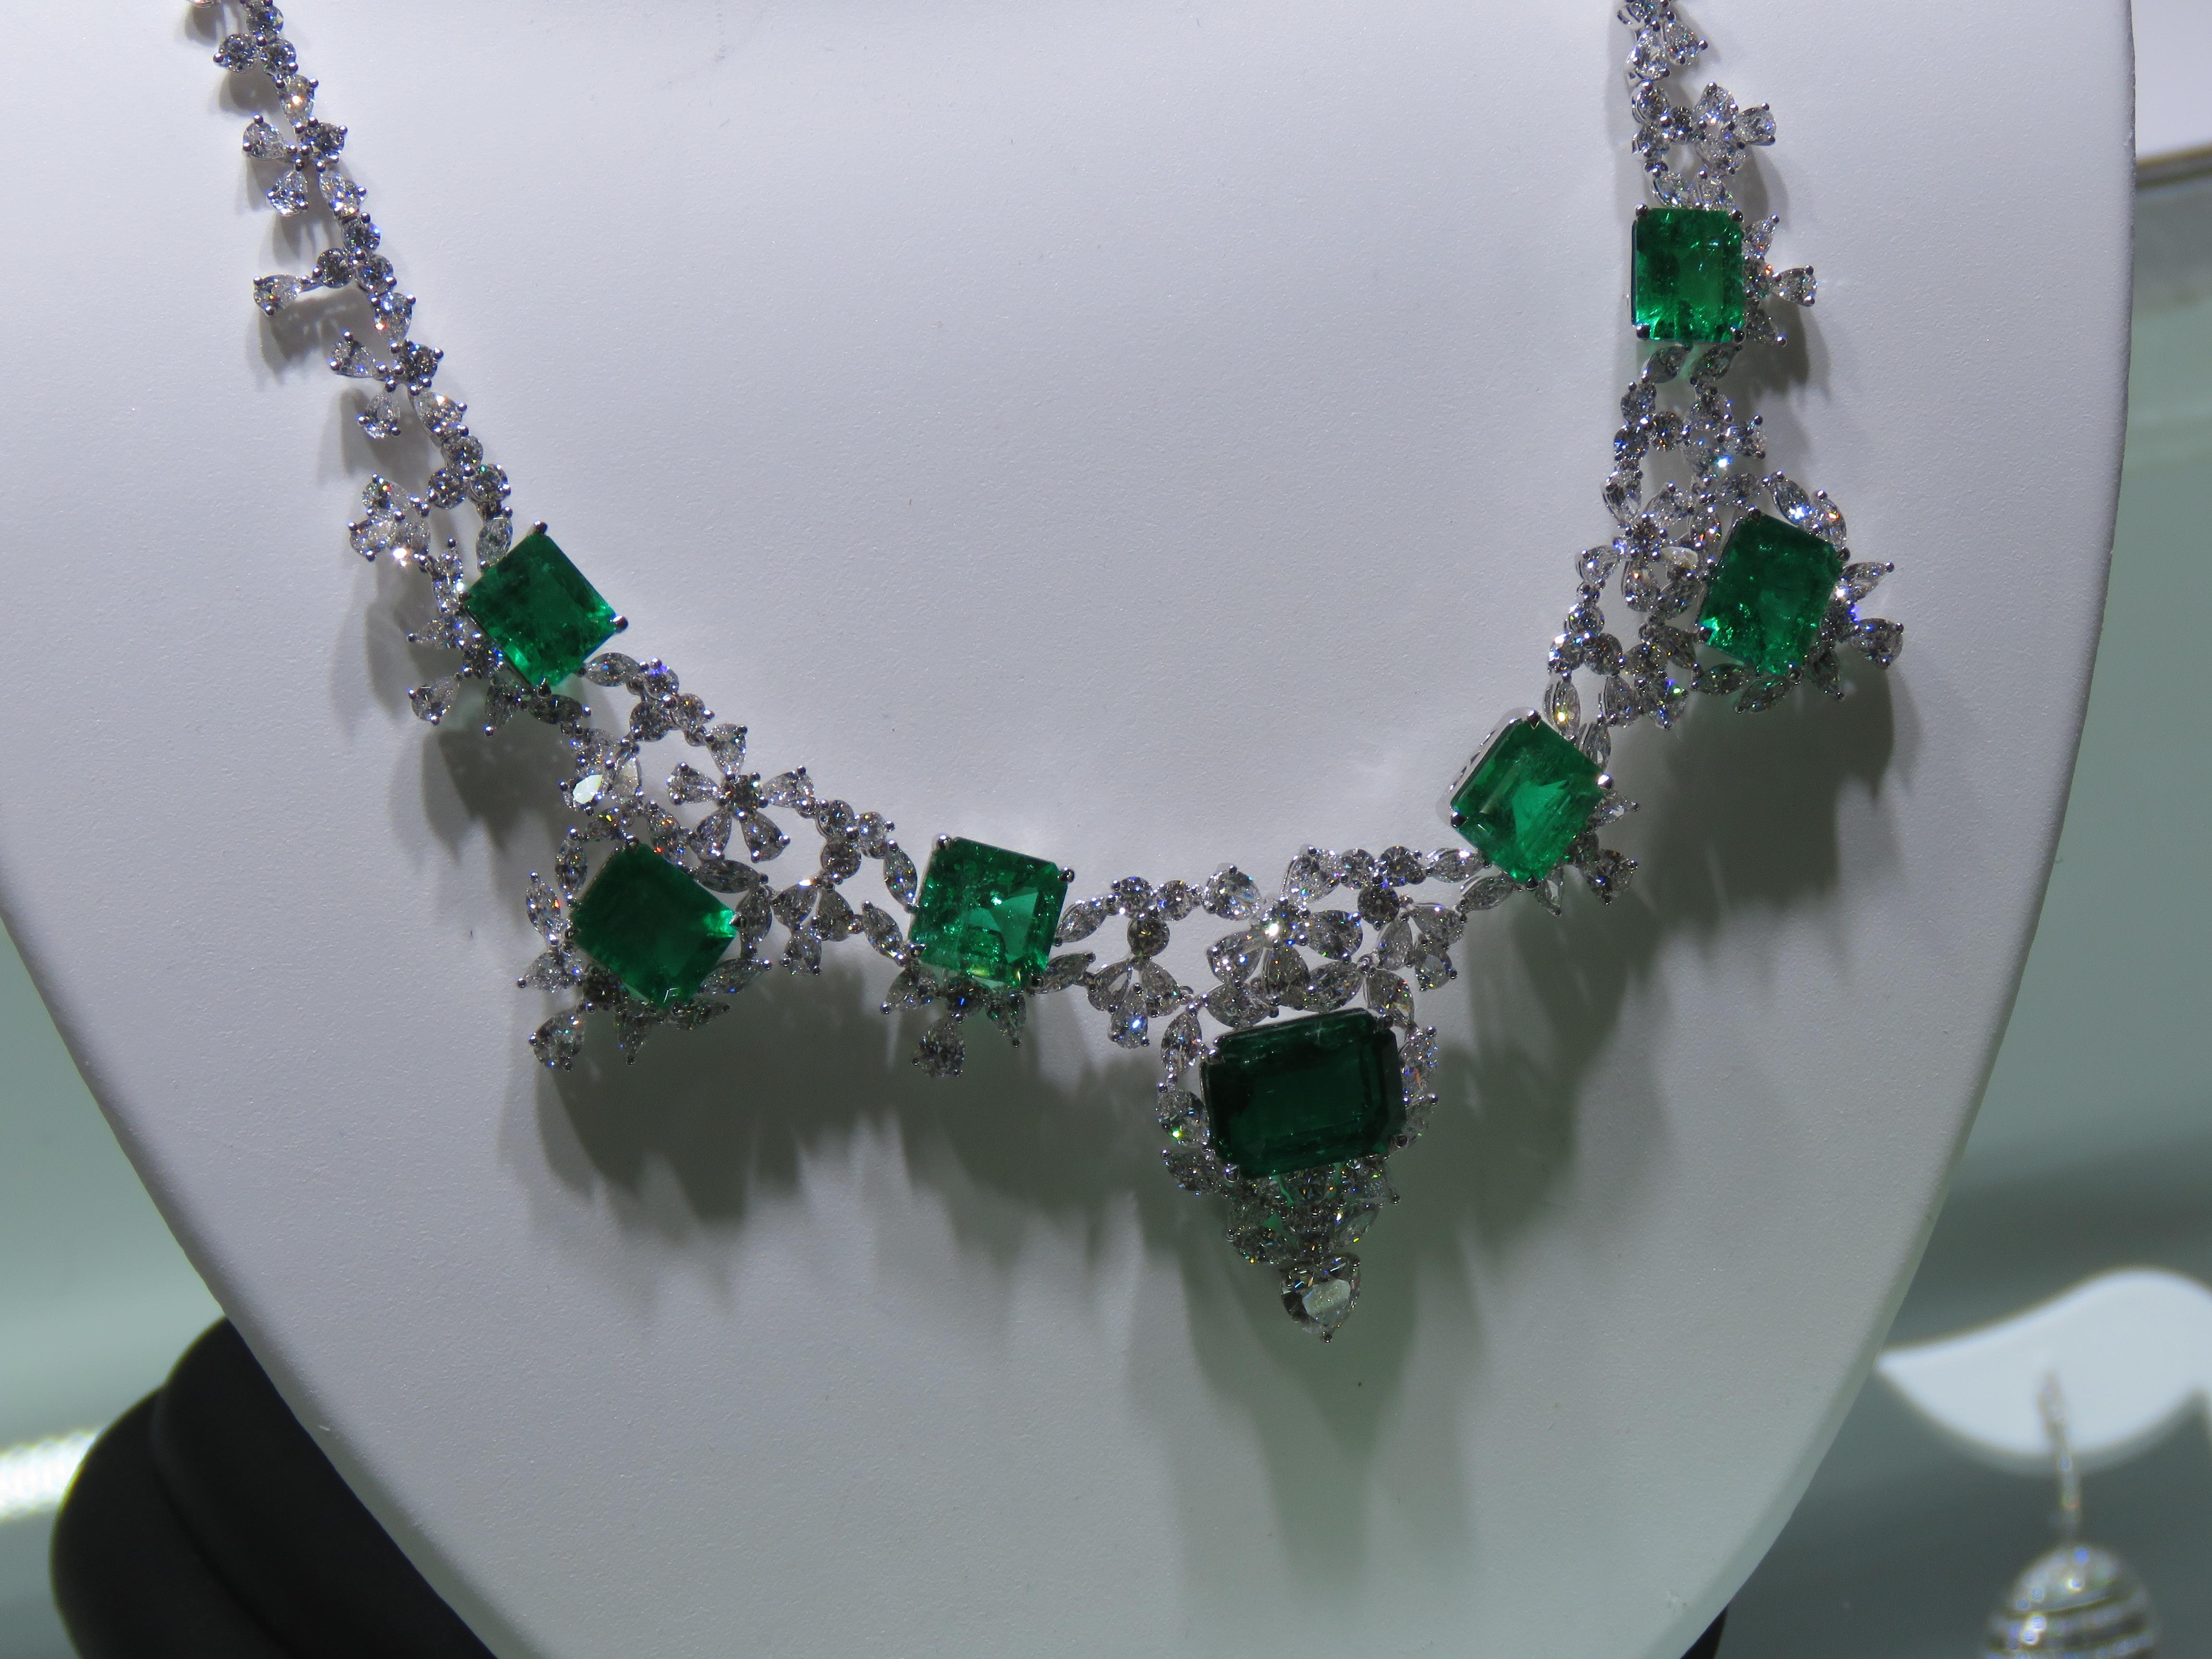 The Following Item we are offering is this Rare Important Radiant 18KT Gold Gorgeous Glittering and Sparkling Magnificent Fancy Cut Rare GIA GRS Certified Colombian Emeralds and Diamond Necklace. Necklace contains approx 45CTS of Beautiful Fancy